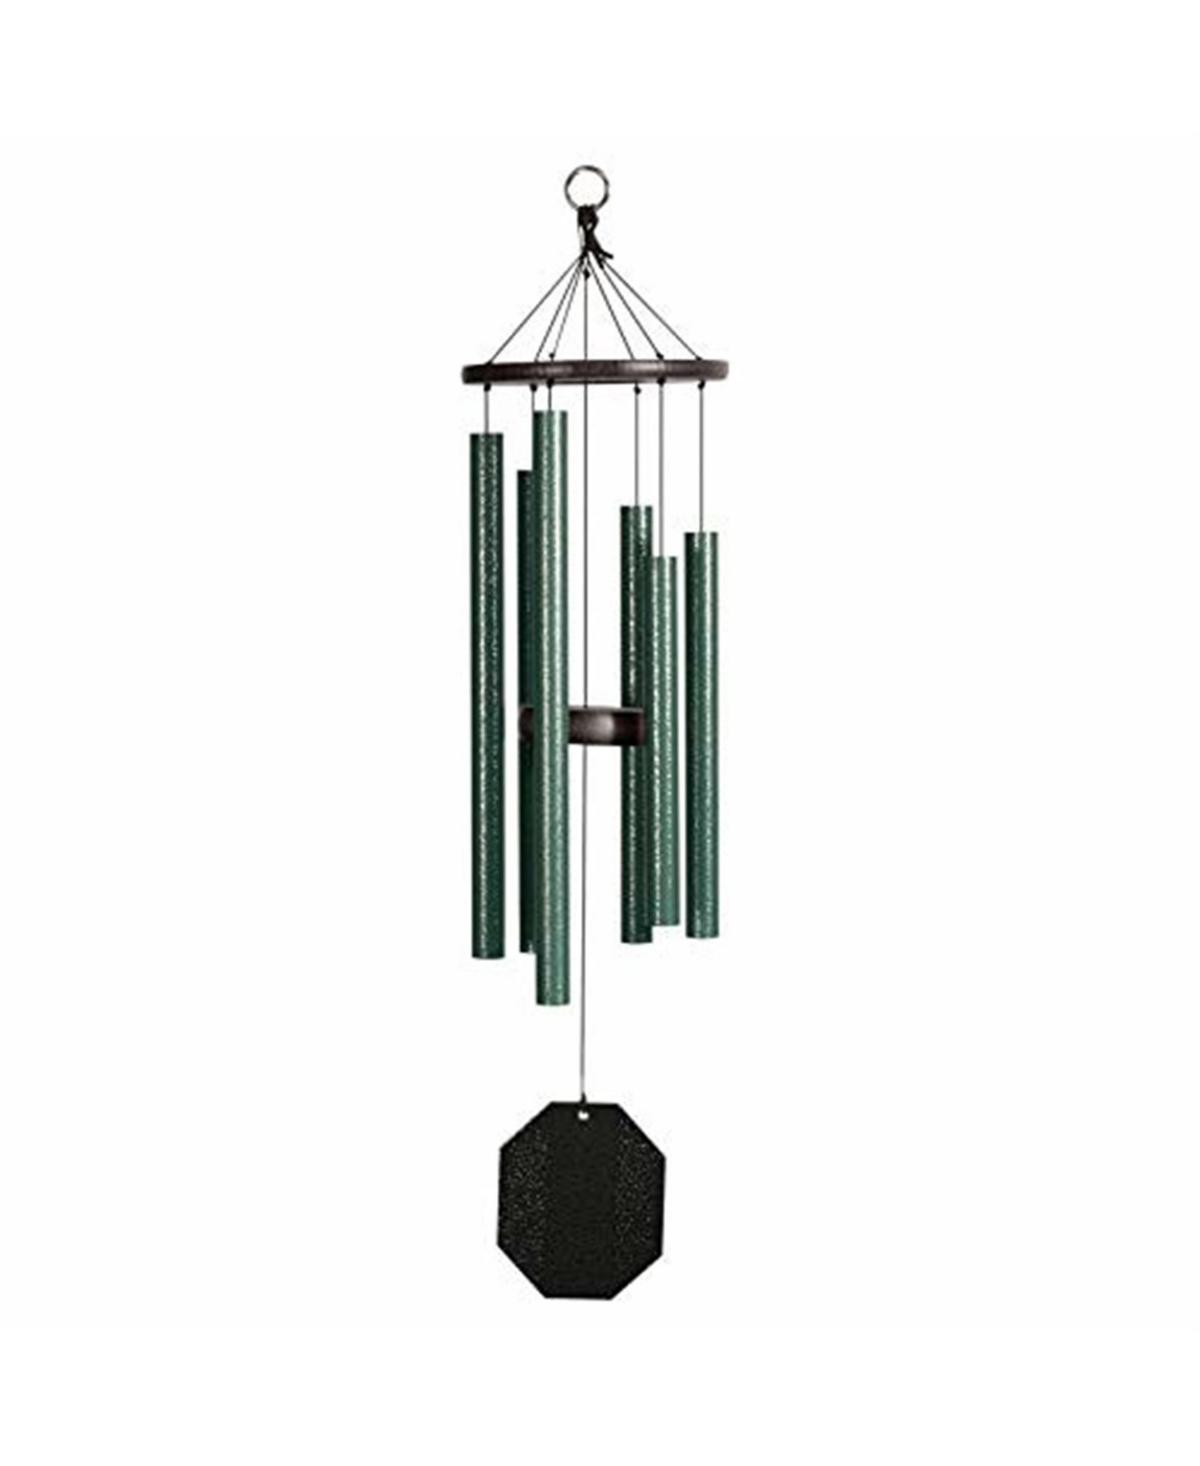 Lambright Chimes, Amish Crafted Tinker Belle Wind Chime, 32 Inches - Green